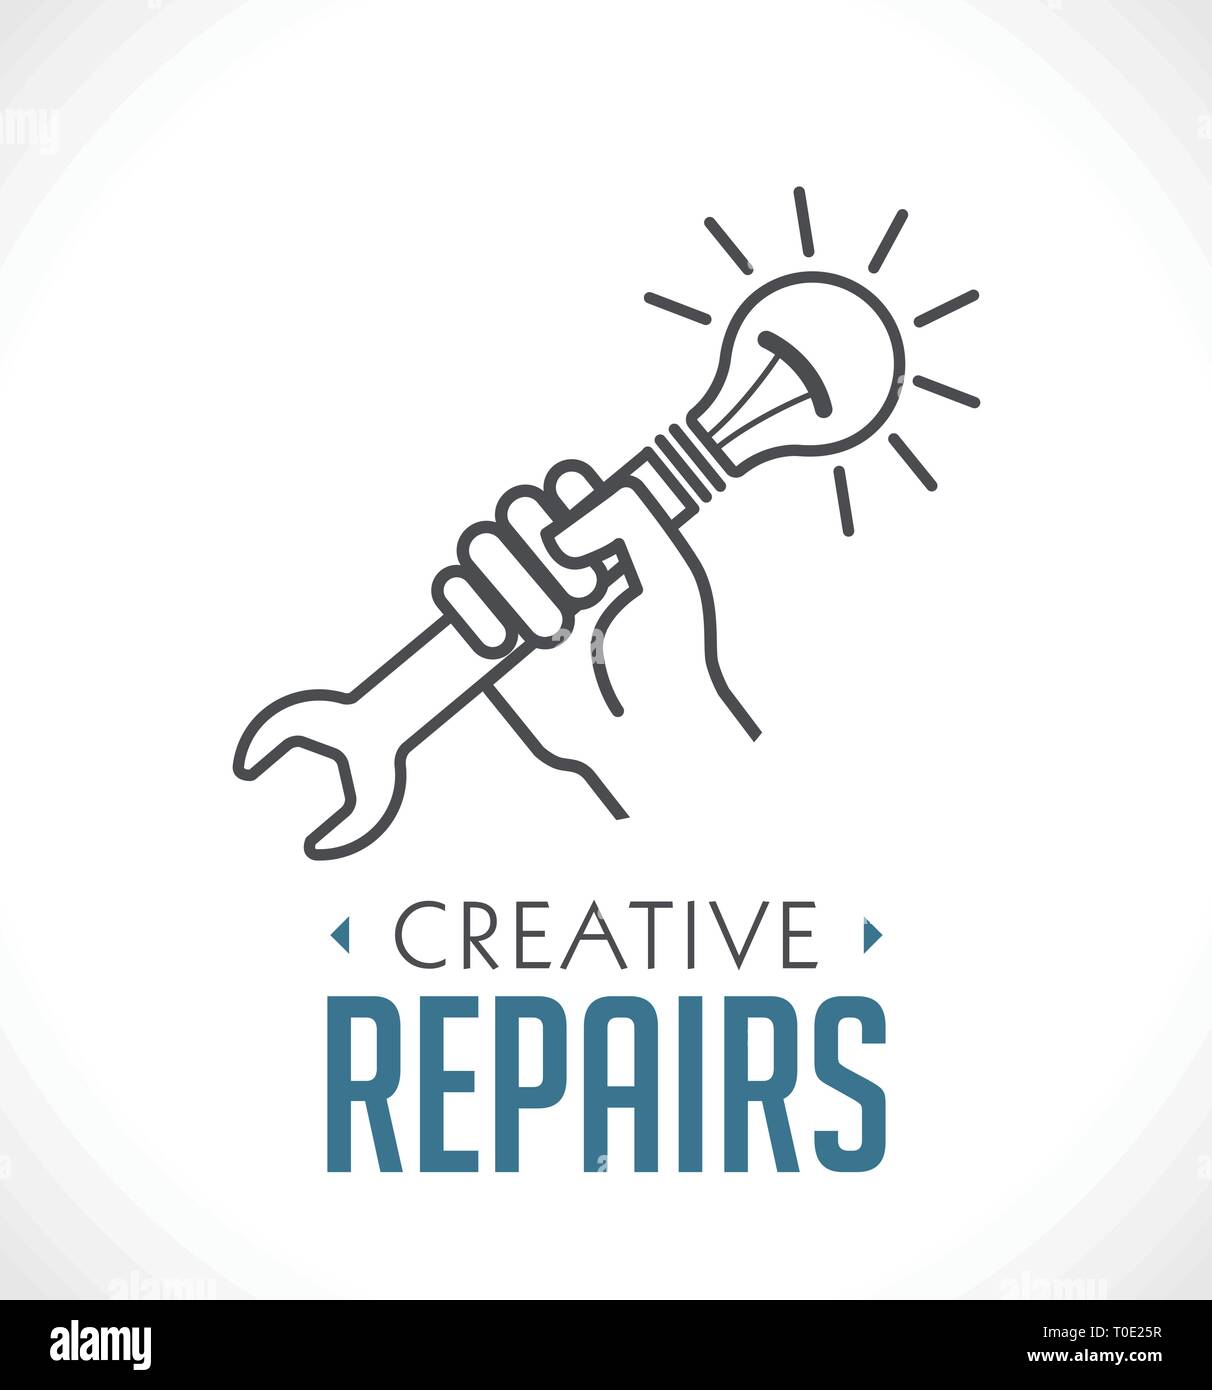 Repairs icon - hand with wrench concept Stock Vector